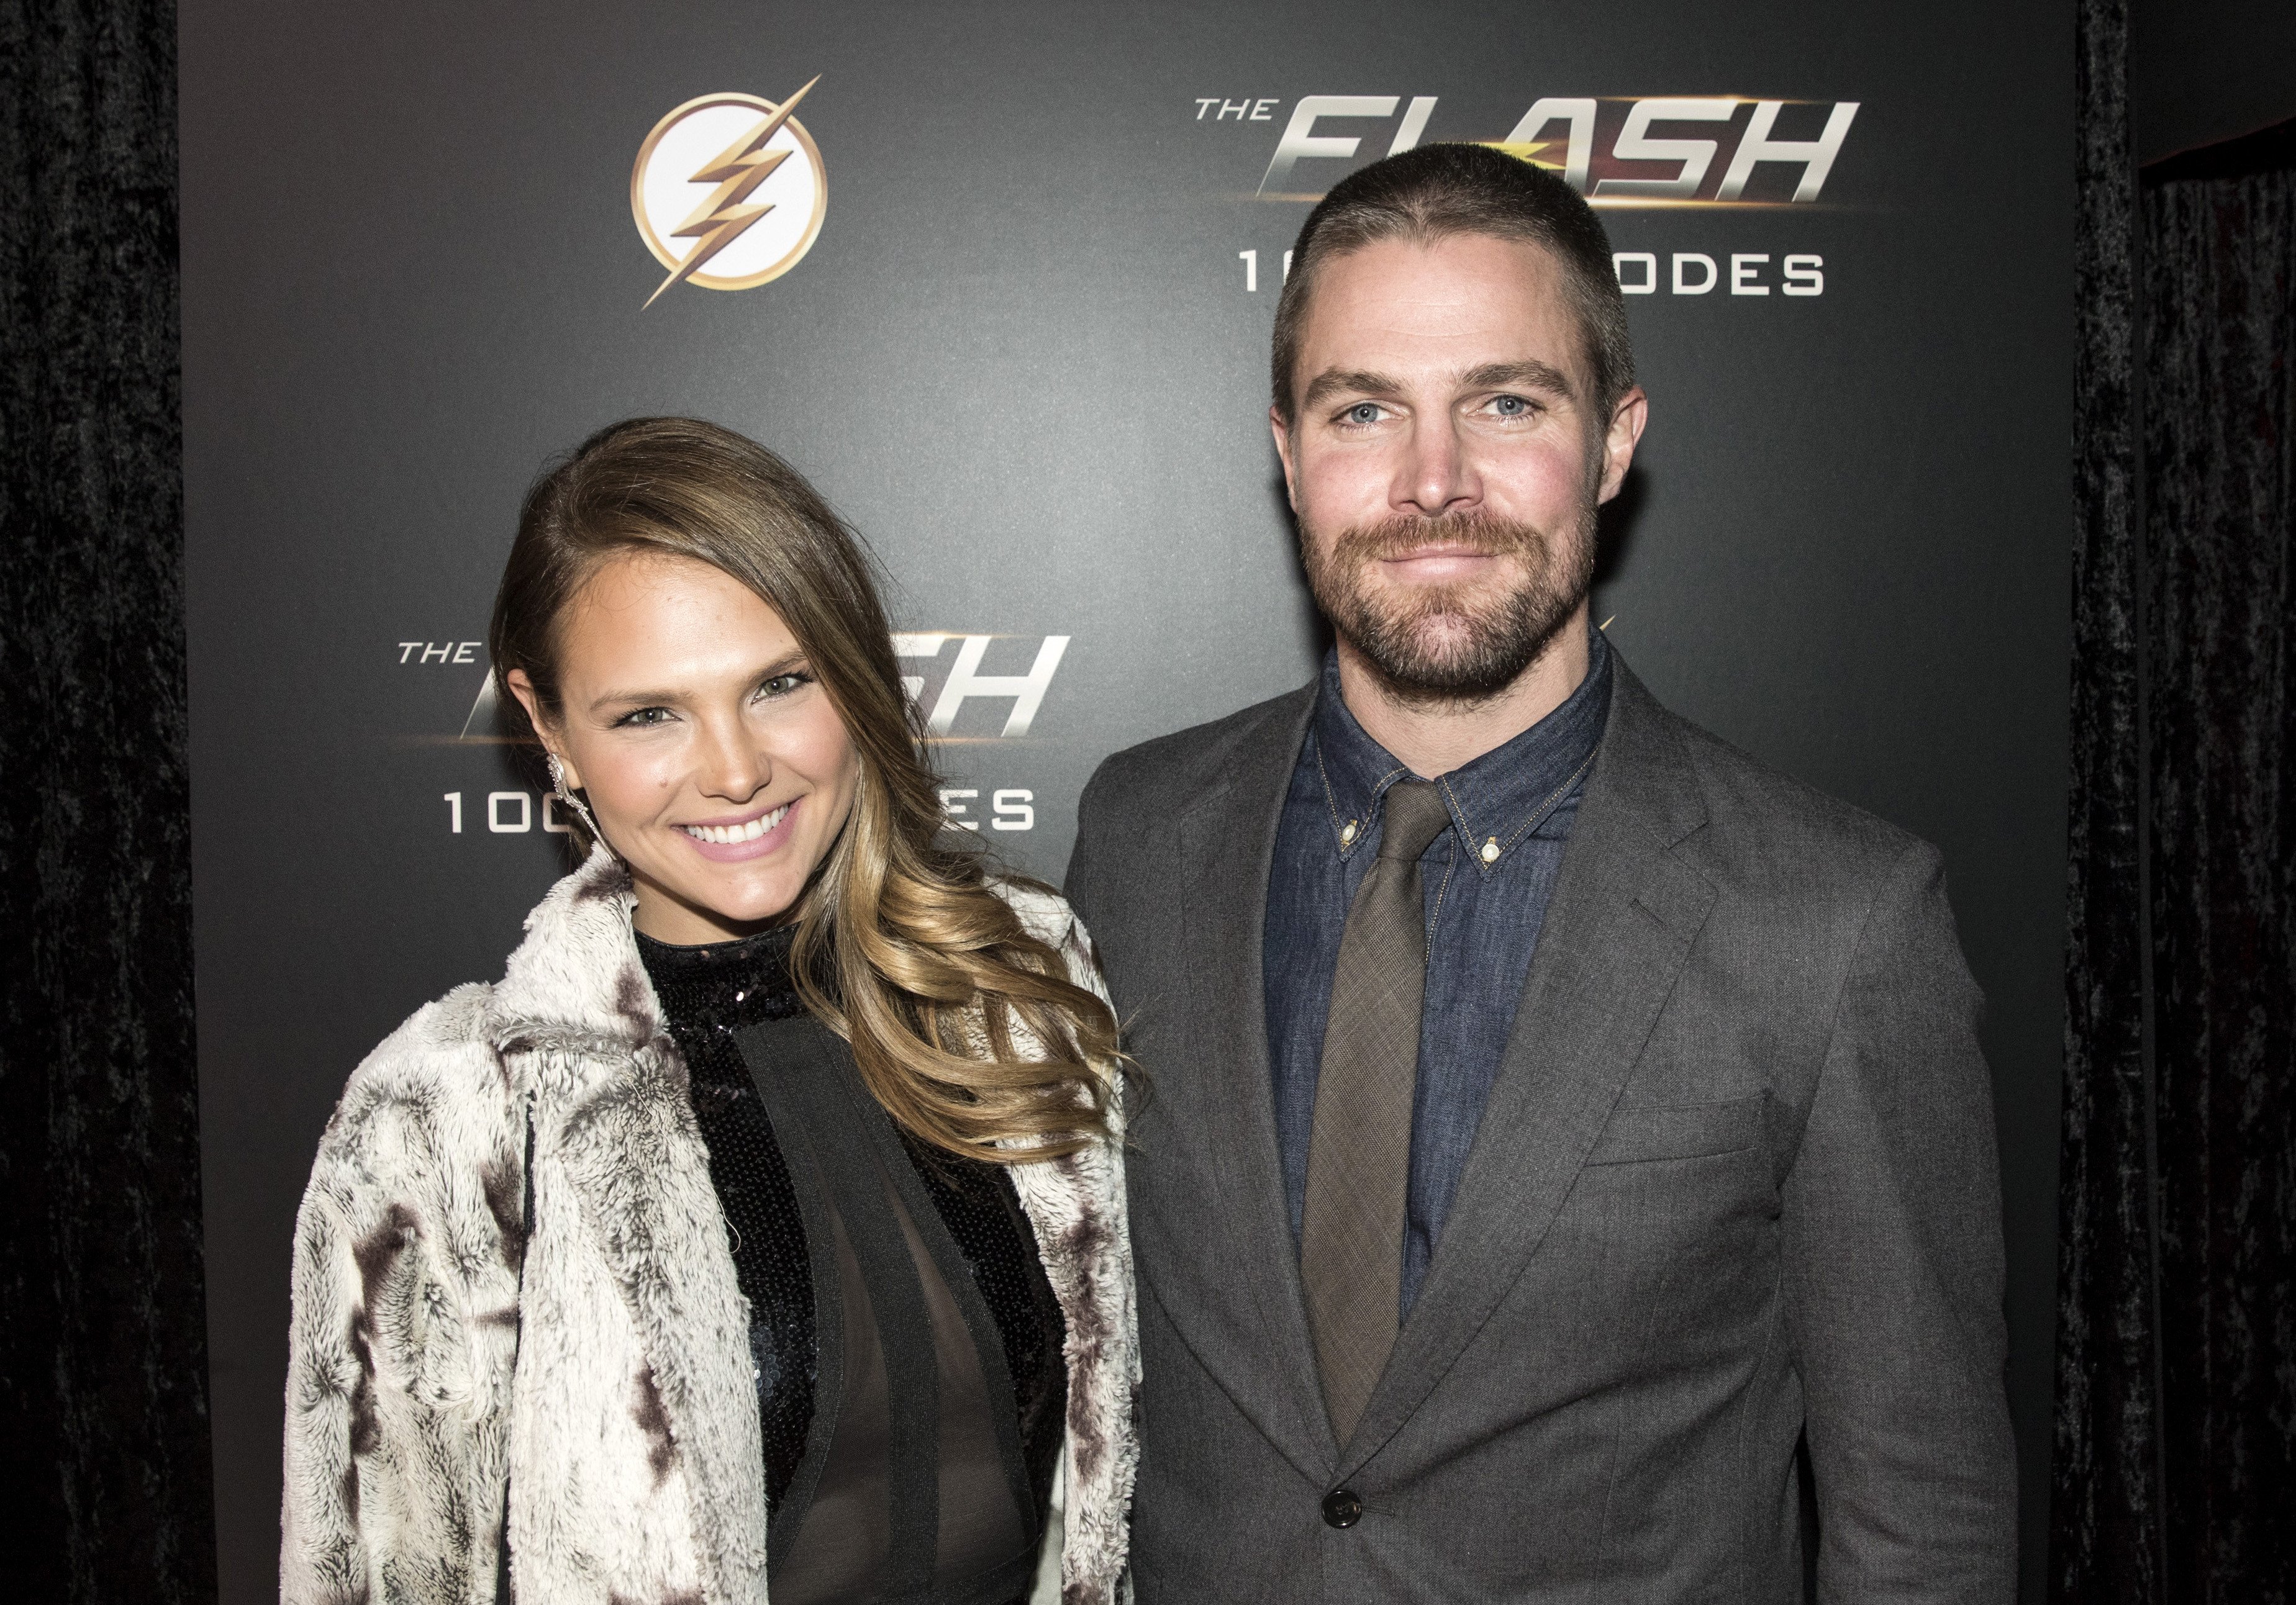 Actors Cassandra Jean Whitehead and Stephen Amell attend the red carpet at "The Flash" 100TH Episode Celebration at the Commodore Ballroom on November 17, 2018 in Vancouver, Canada. | Source: Getty Images